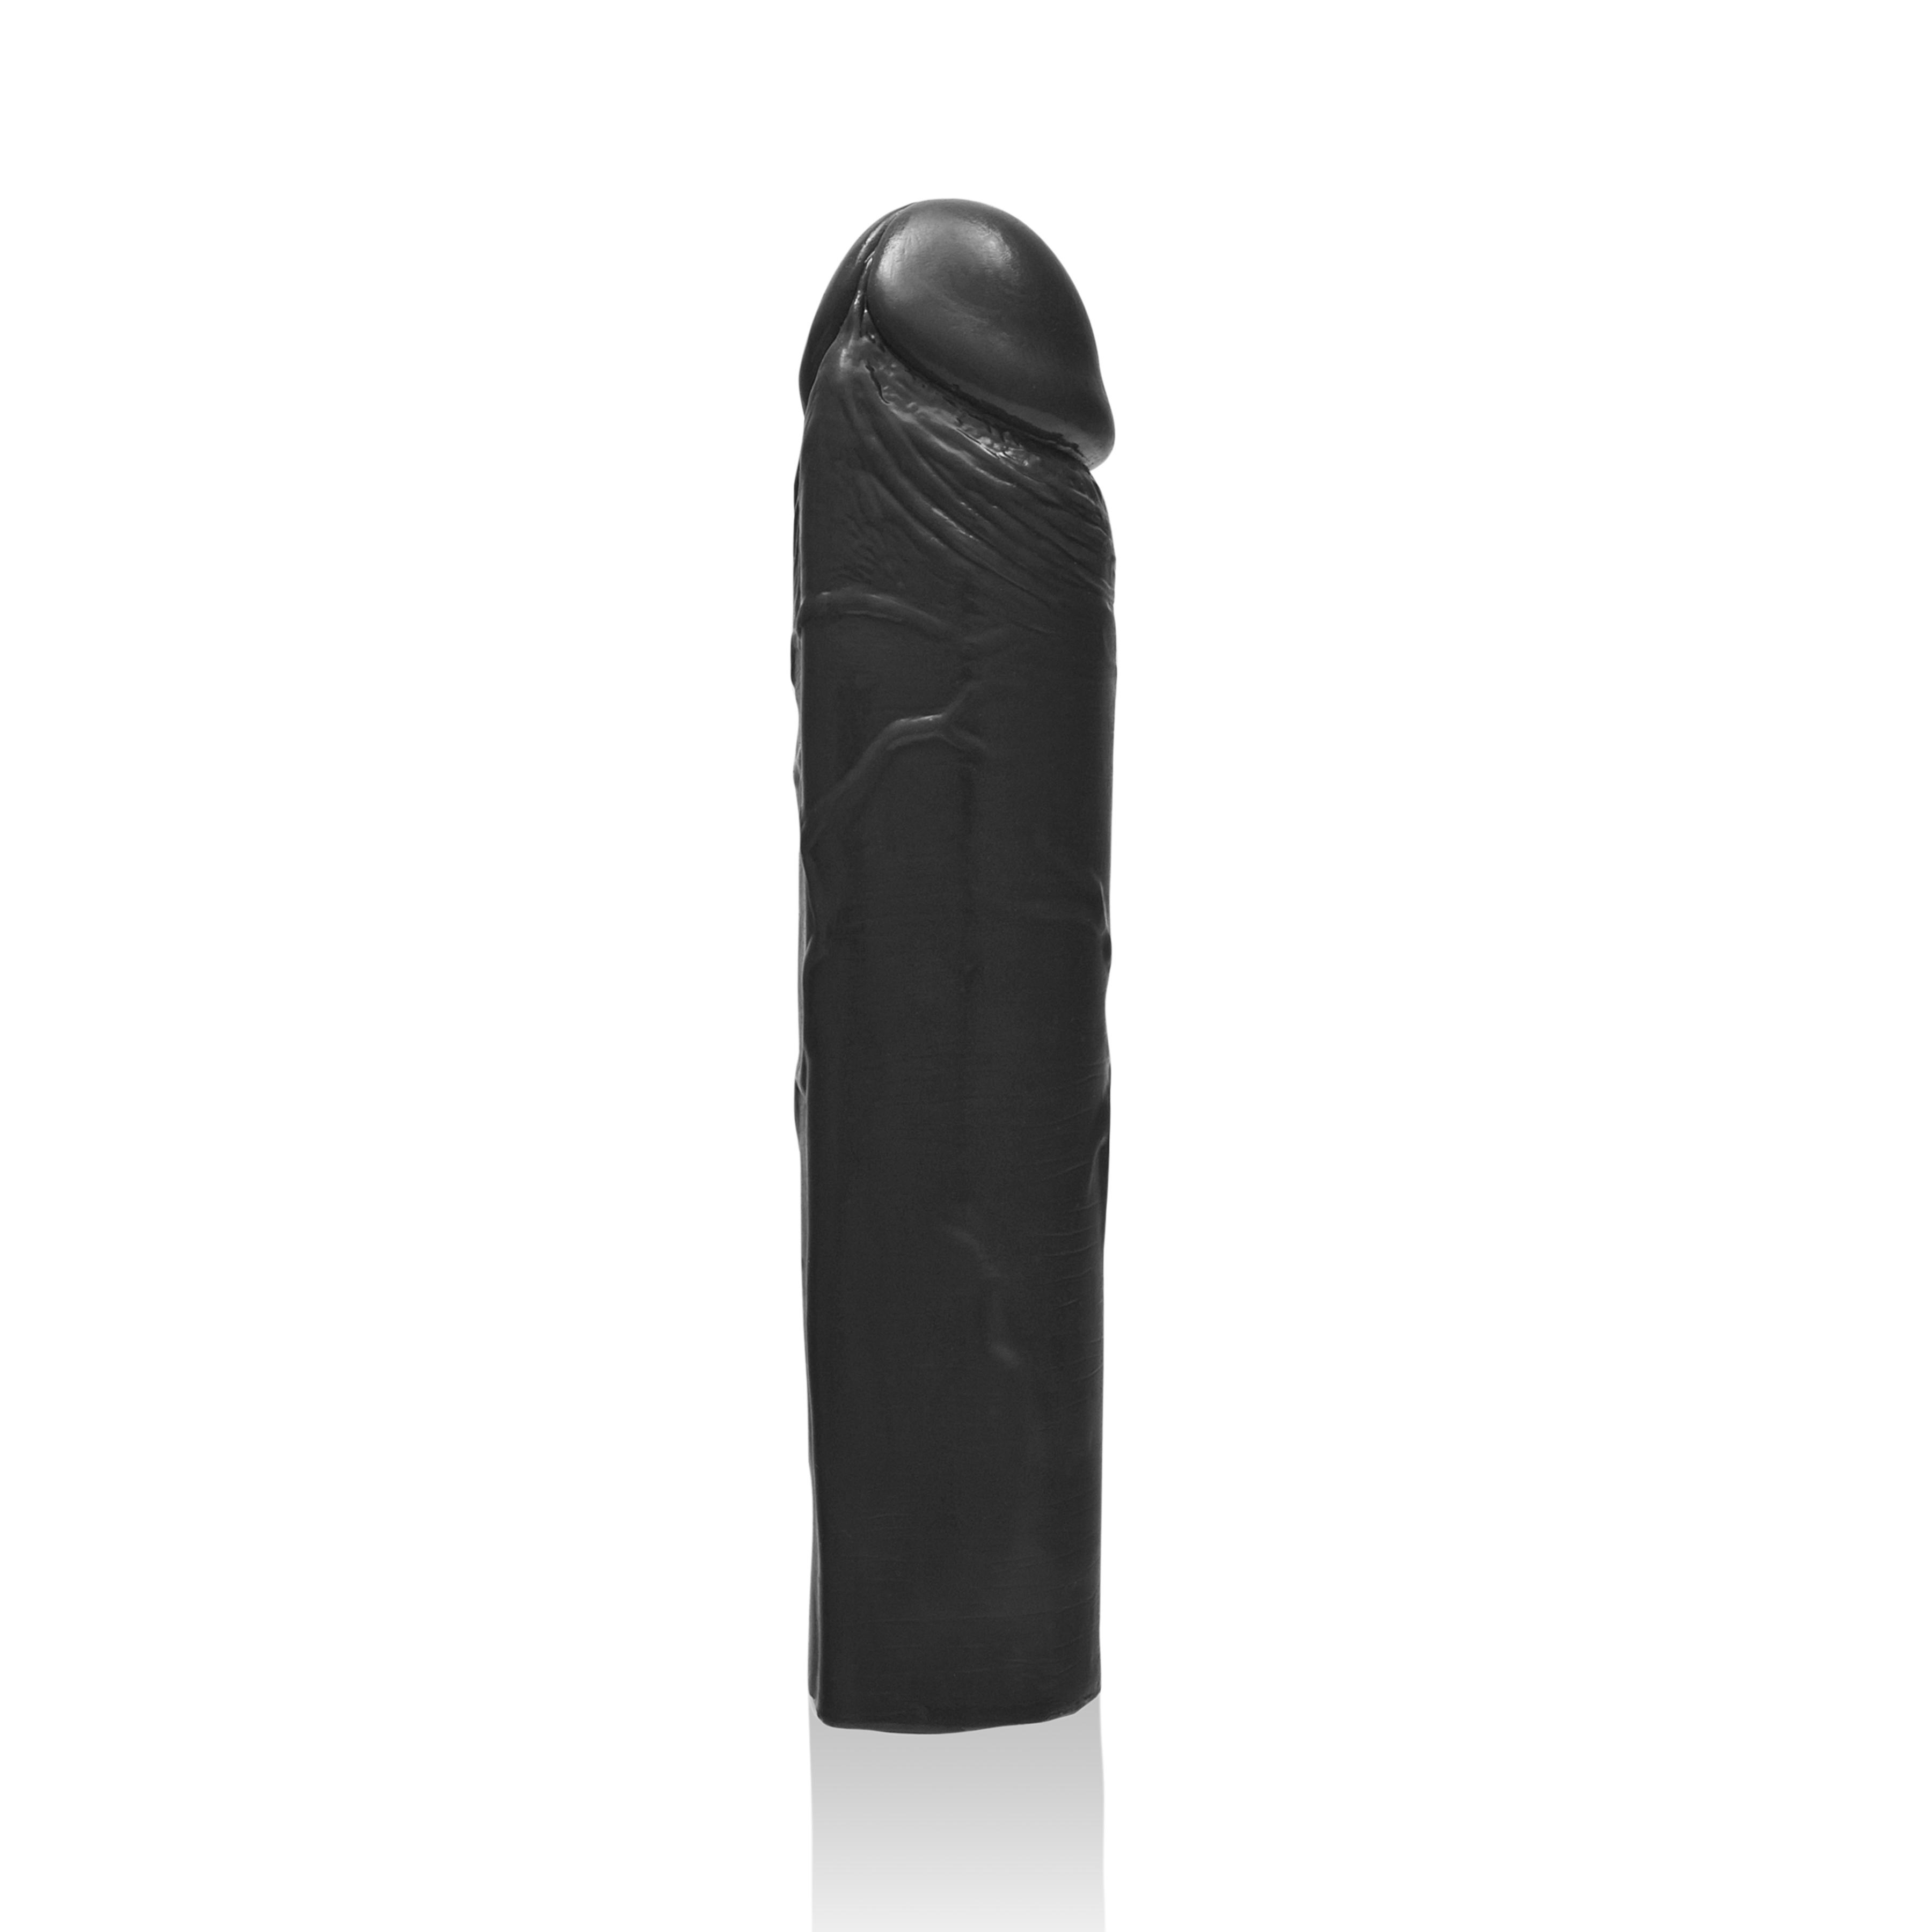 SI IGNITE Cock Dong, Black, 20 cm